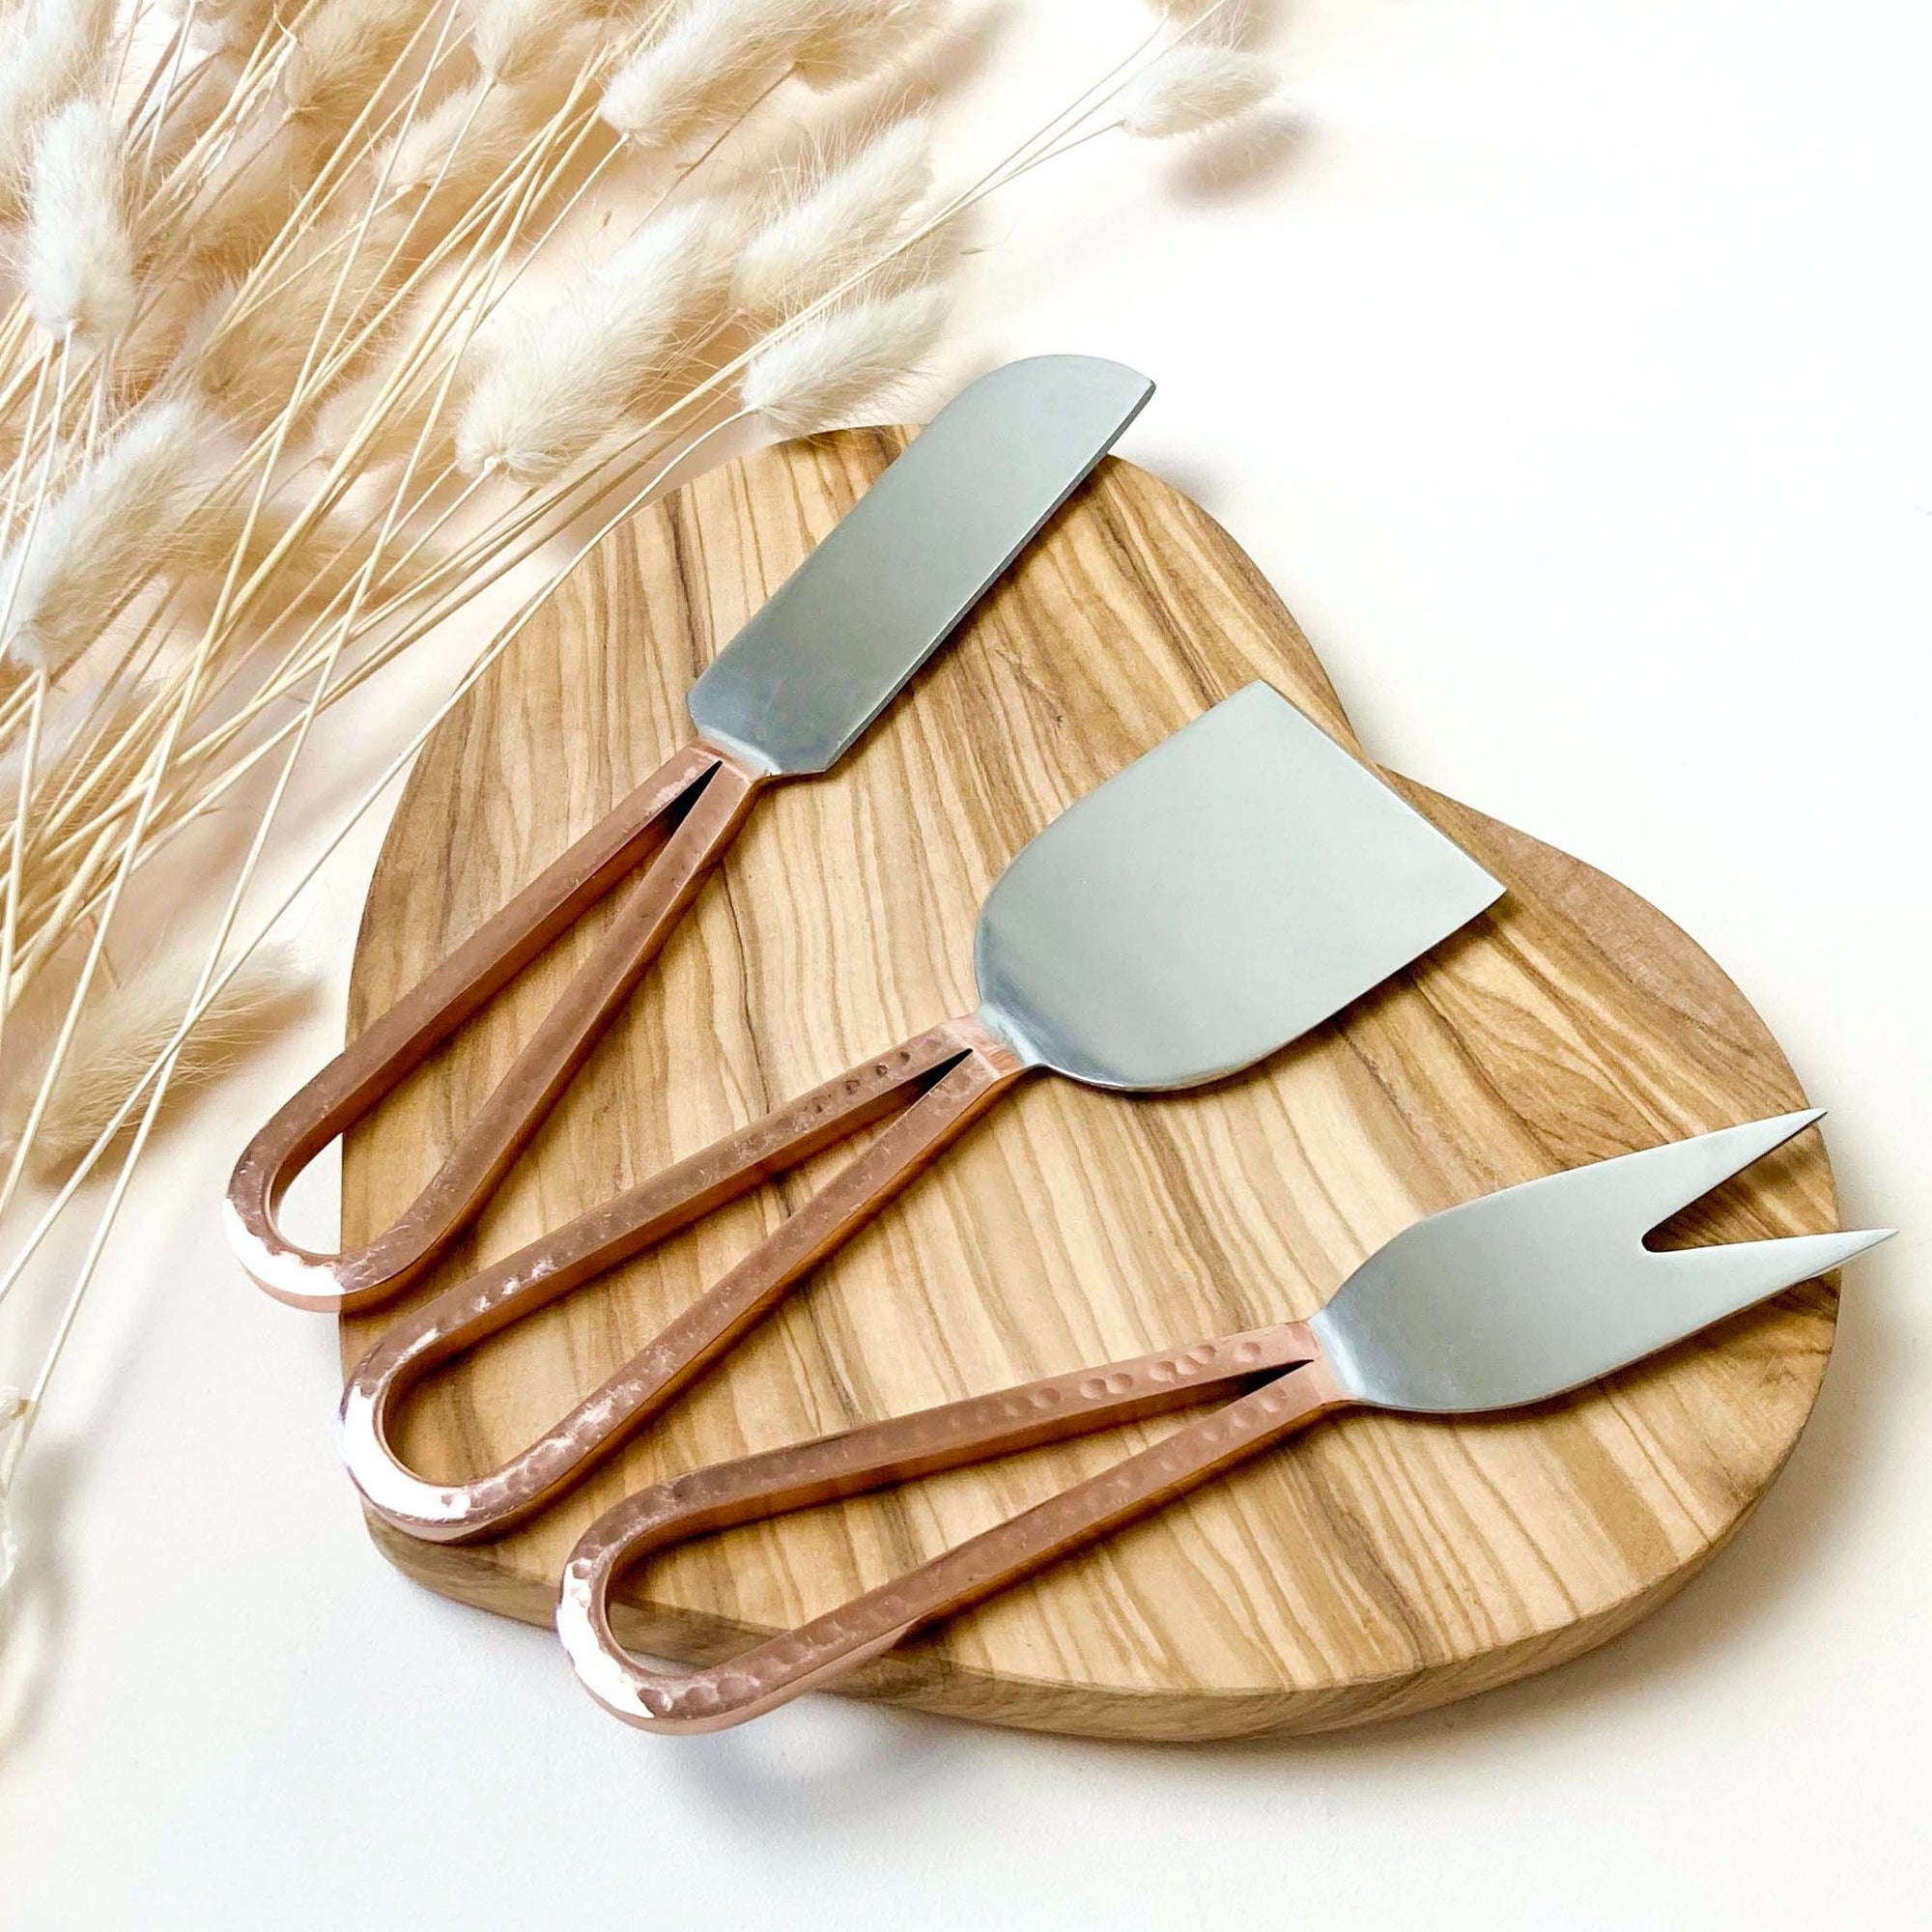 Copper Coated and Stainless Steel set of three cheese knives